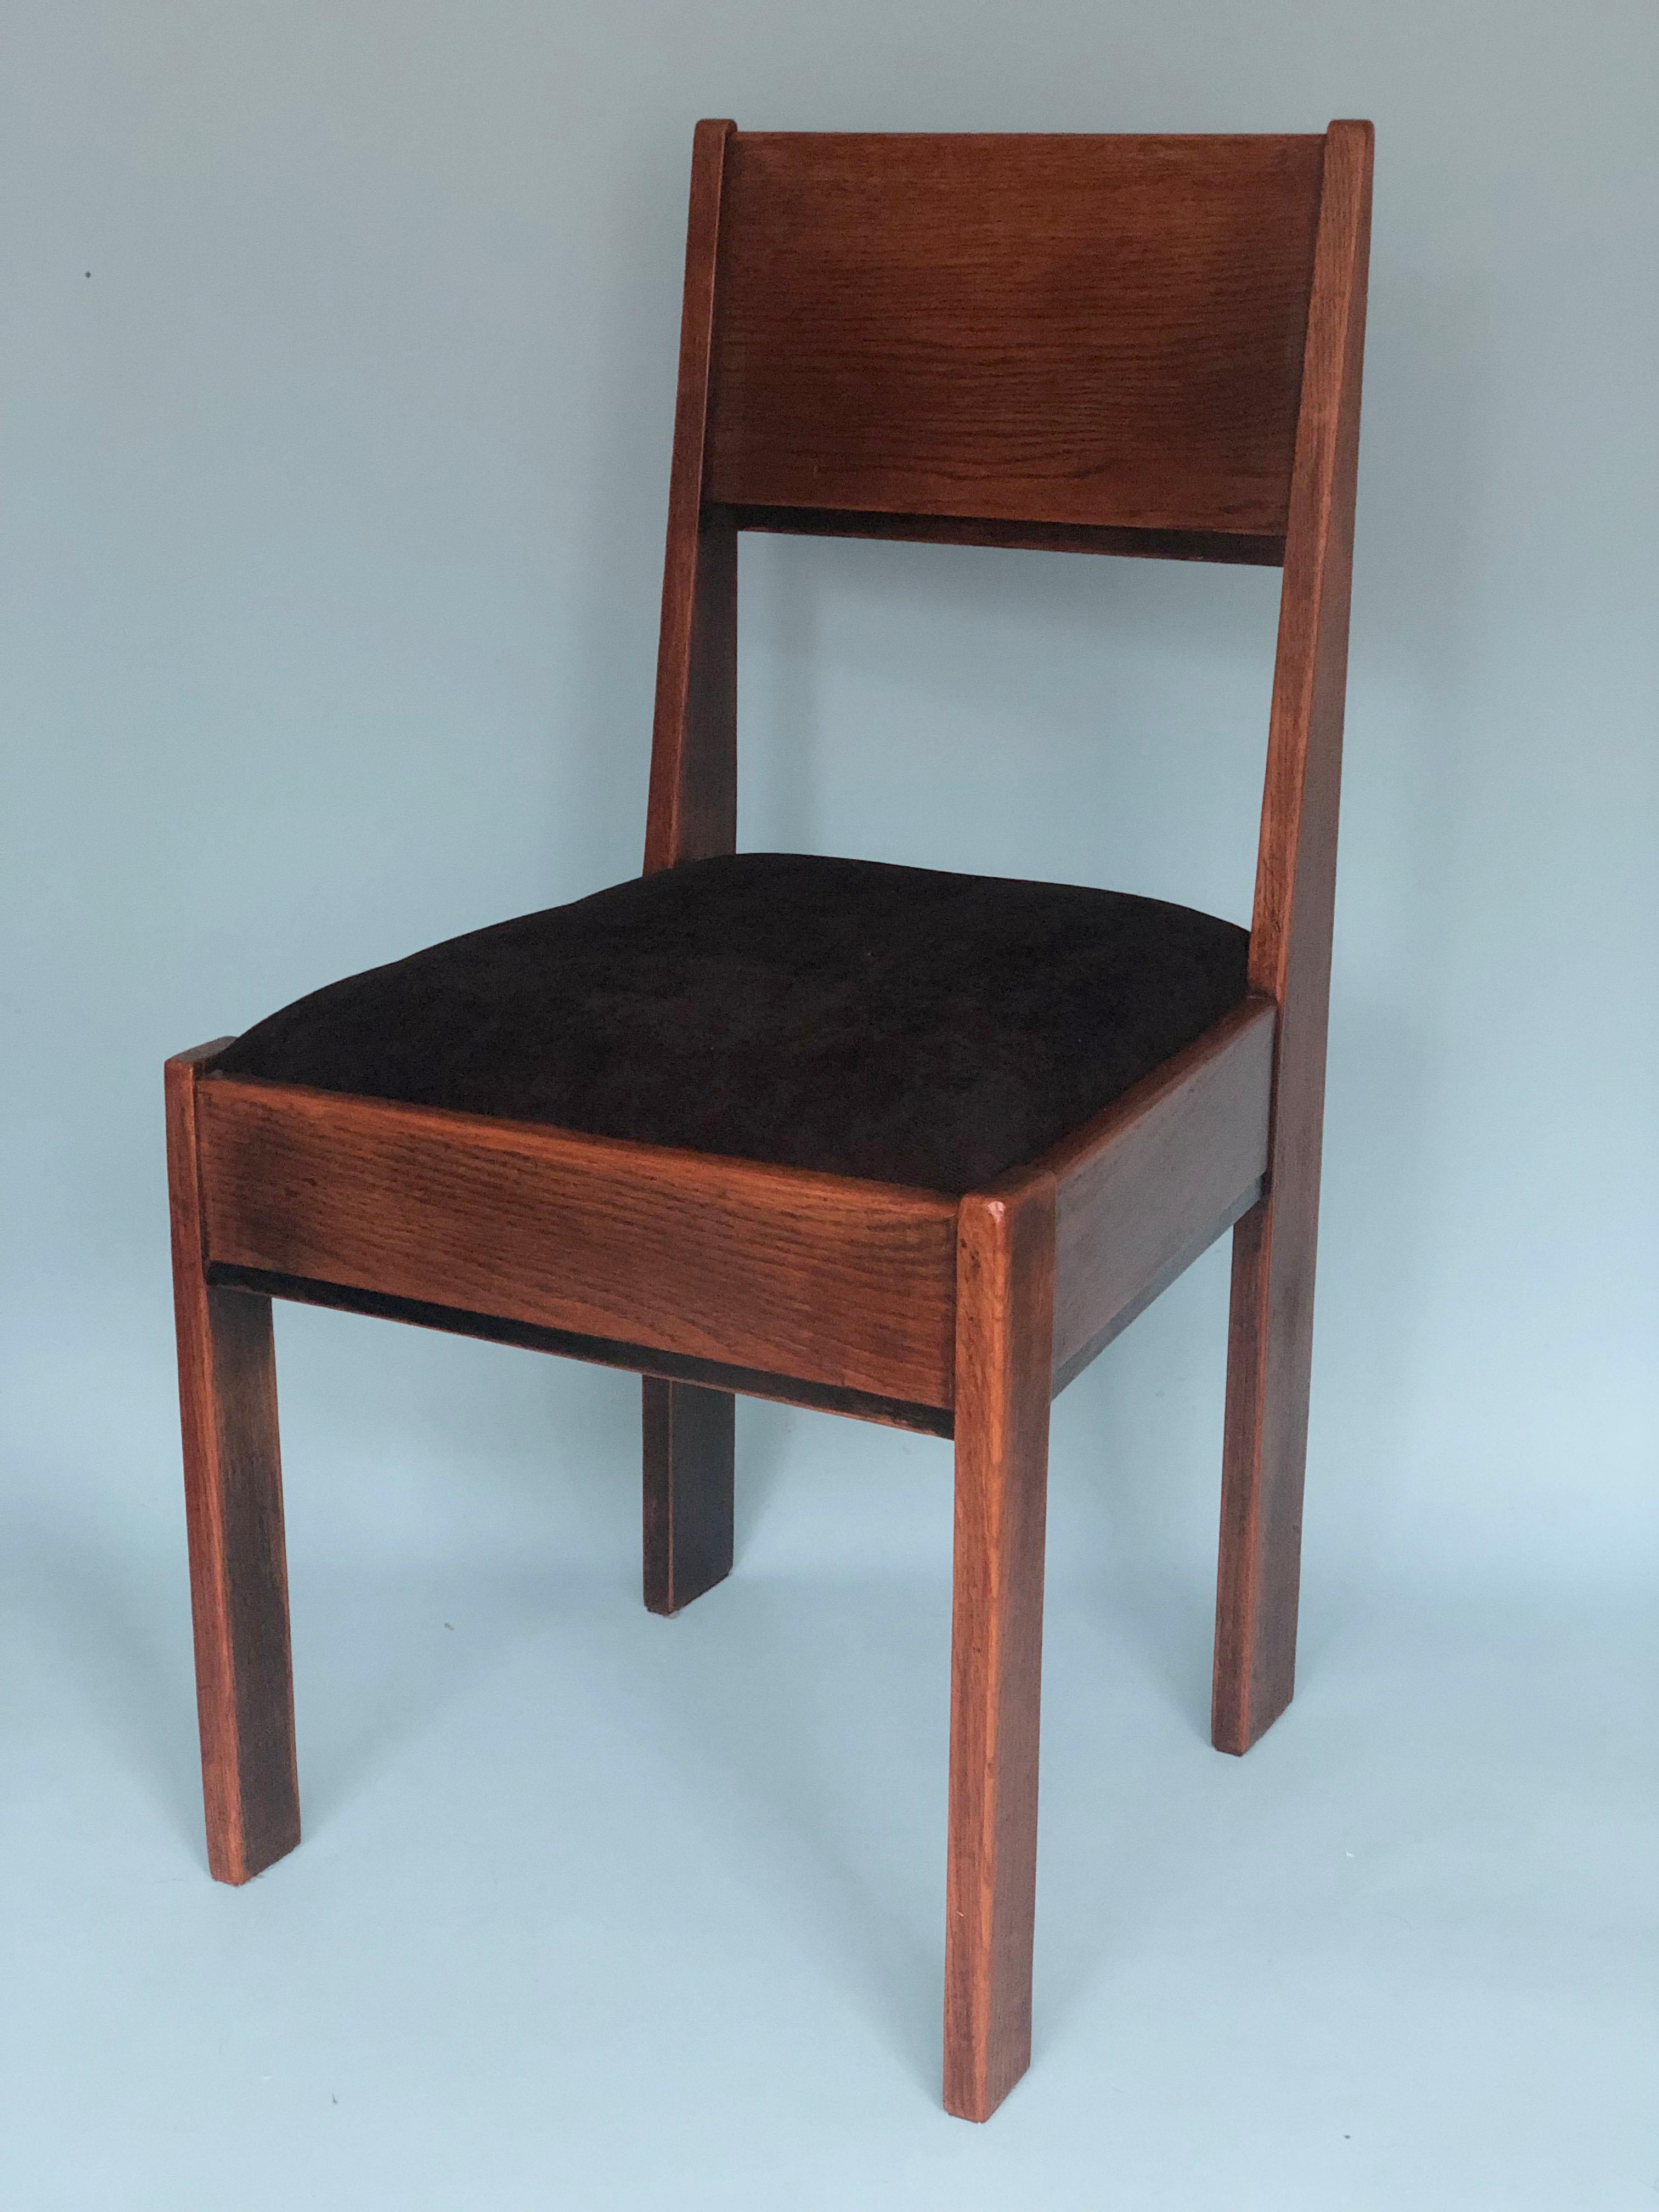 Oak Art Deco Design Chairs by J.A. Muntendam for L.O.V. Oosterbeek 1920s set of2 2